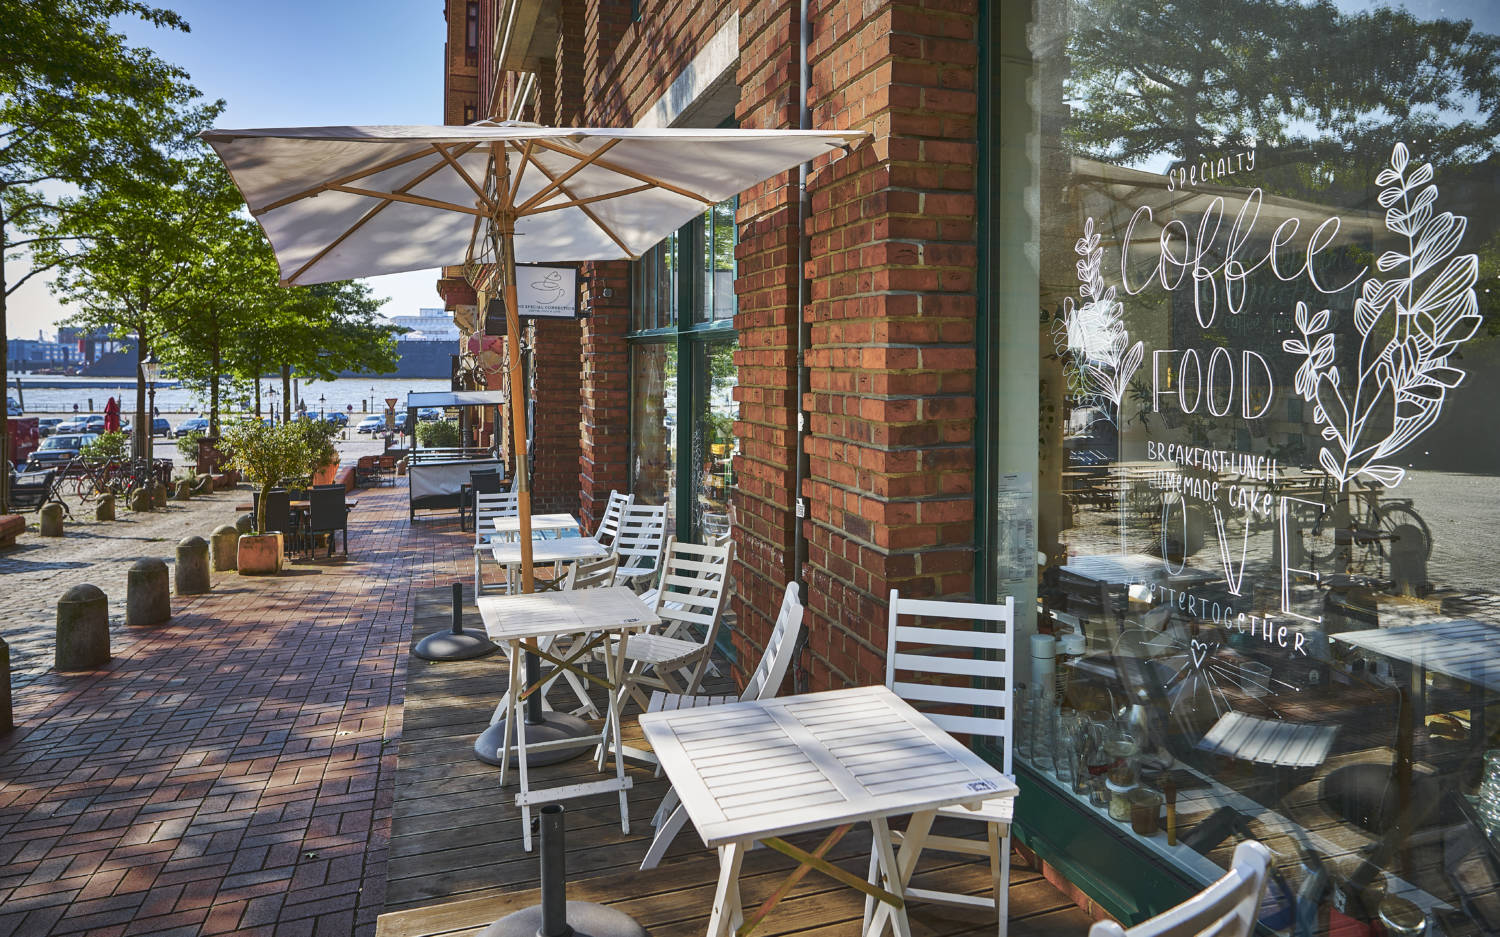 The Special Connection in Altona: Specialty Coffee Food - Breakfast + Lunch - Handmade Cake / ©Marc Sill